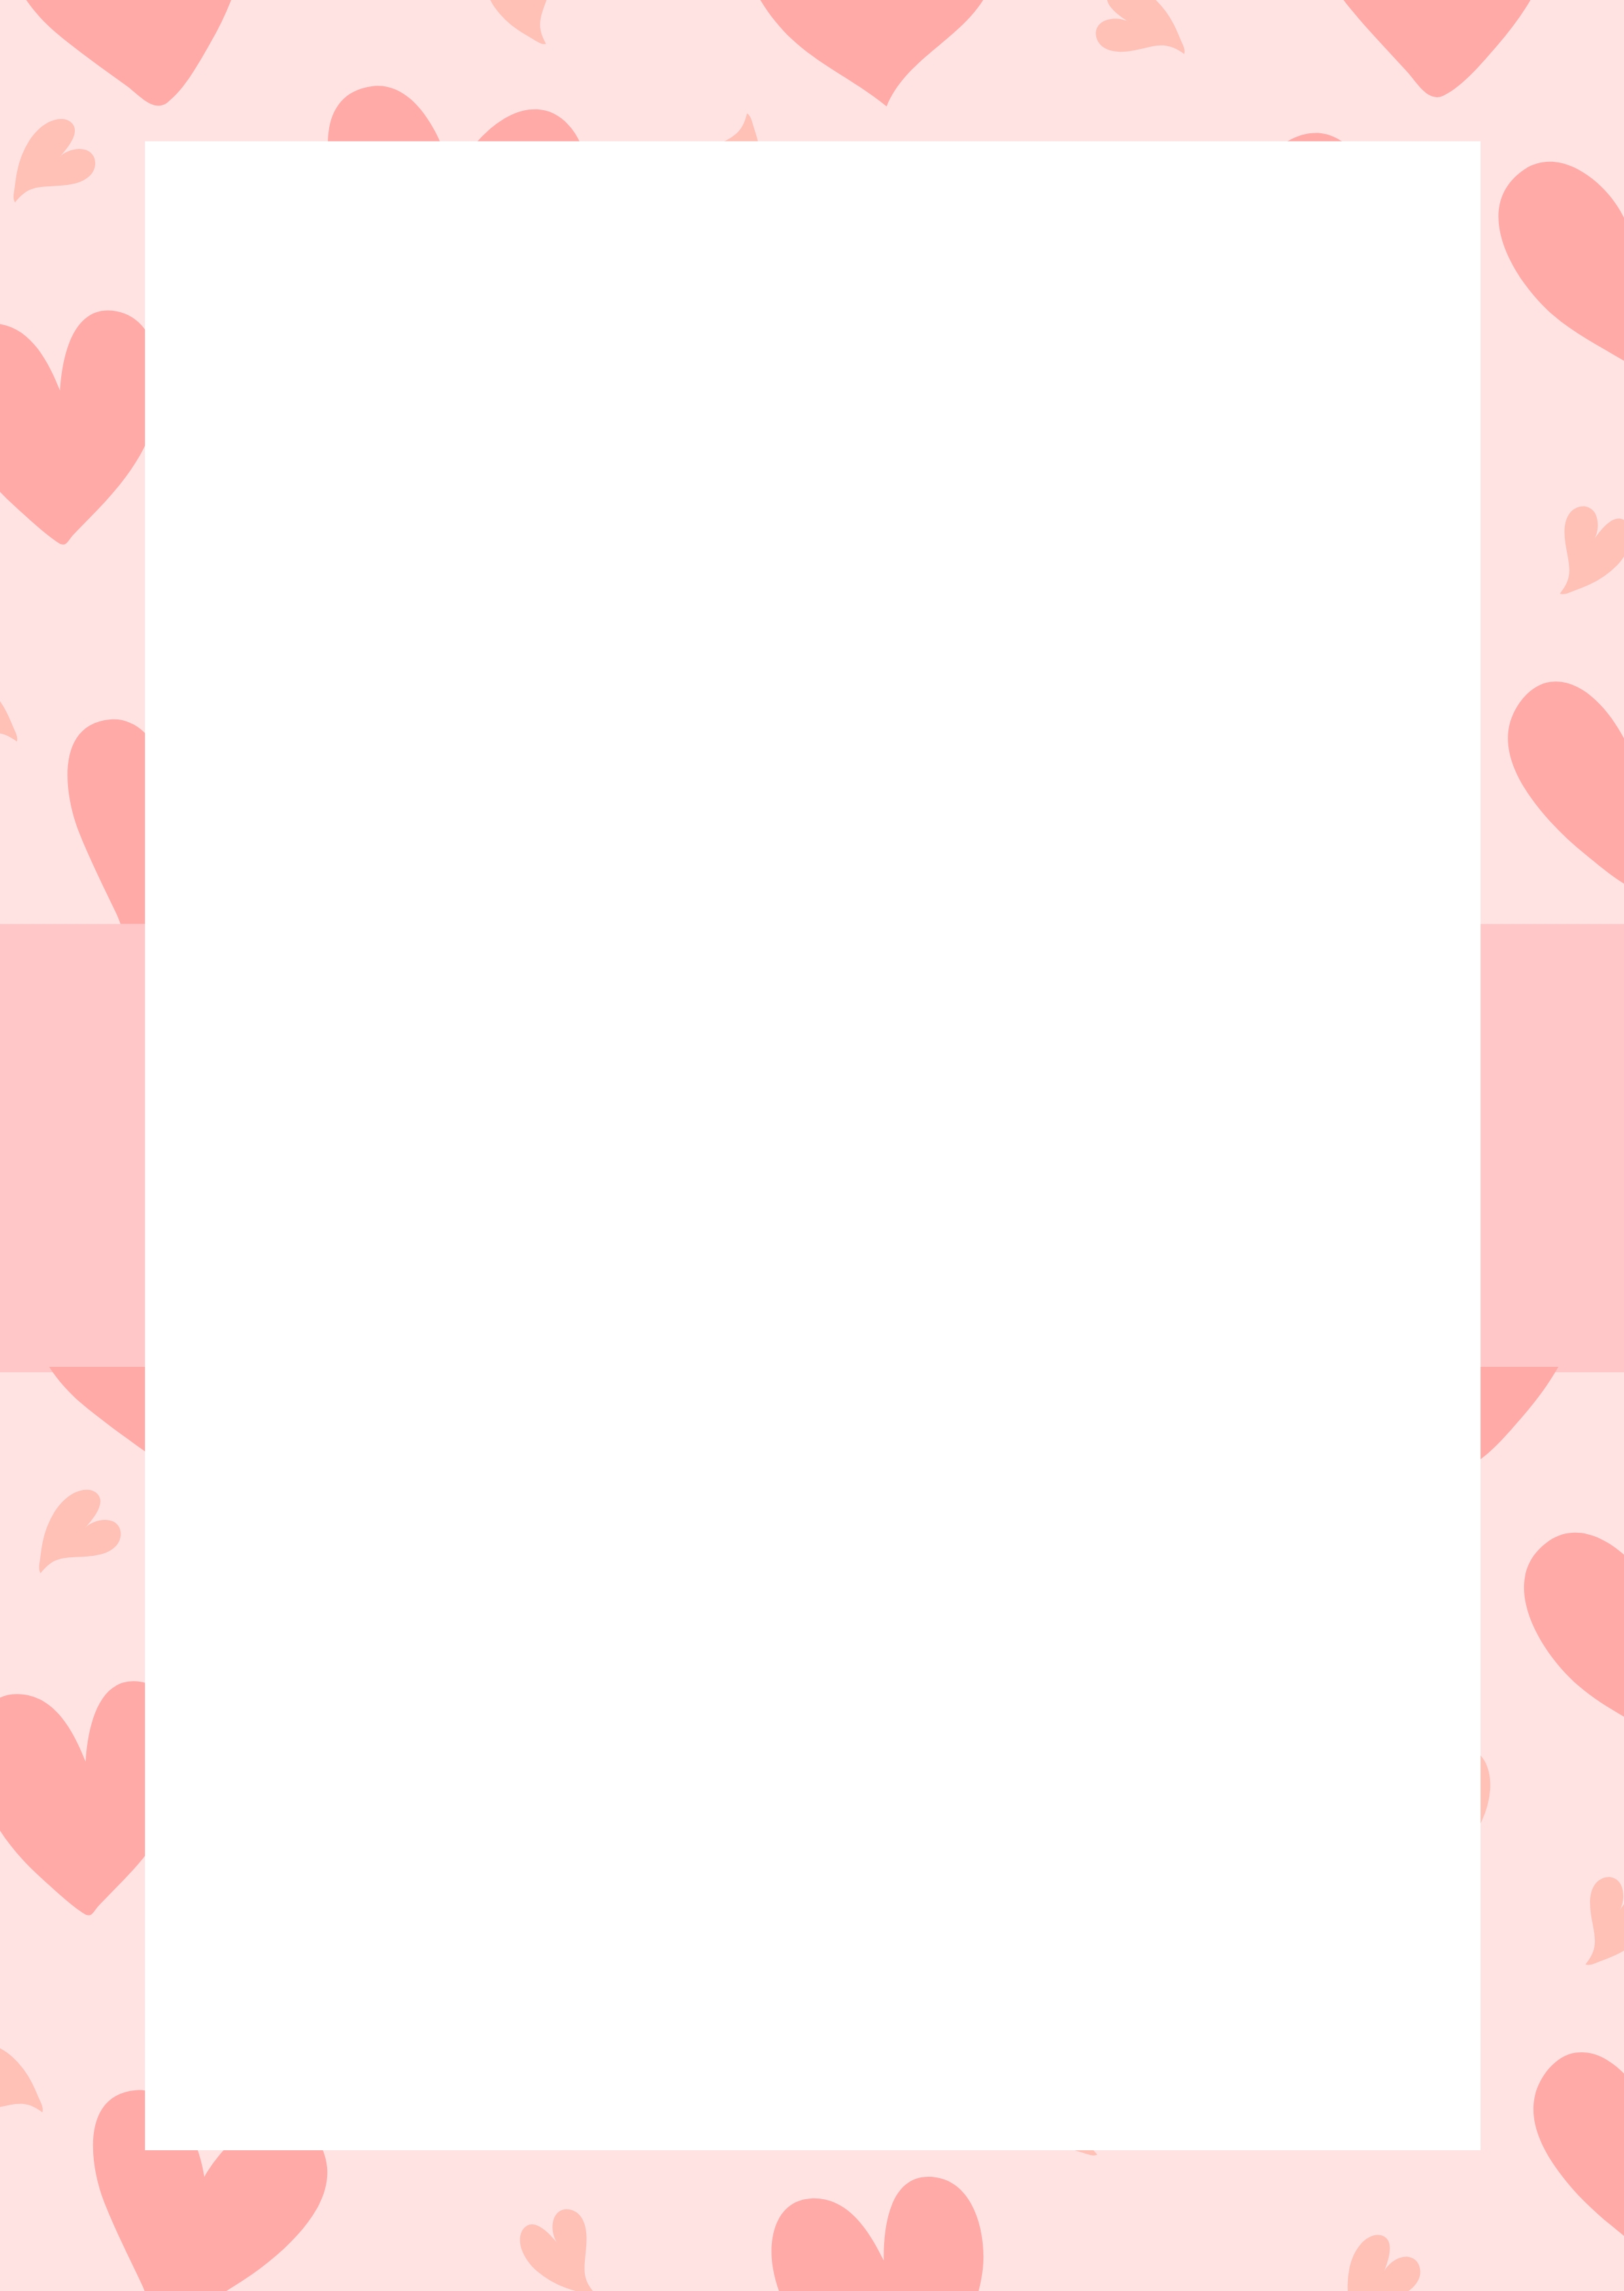 Free Decorative Page Border - Download in Word, Google Docs ...